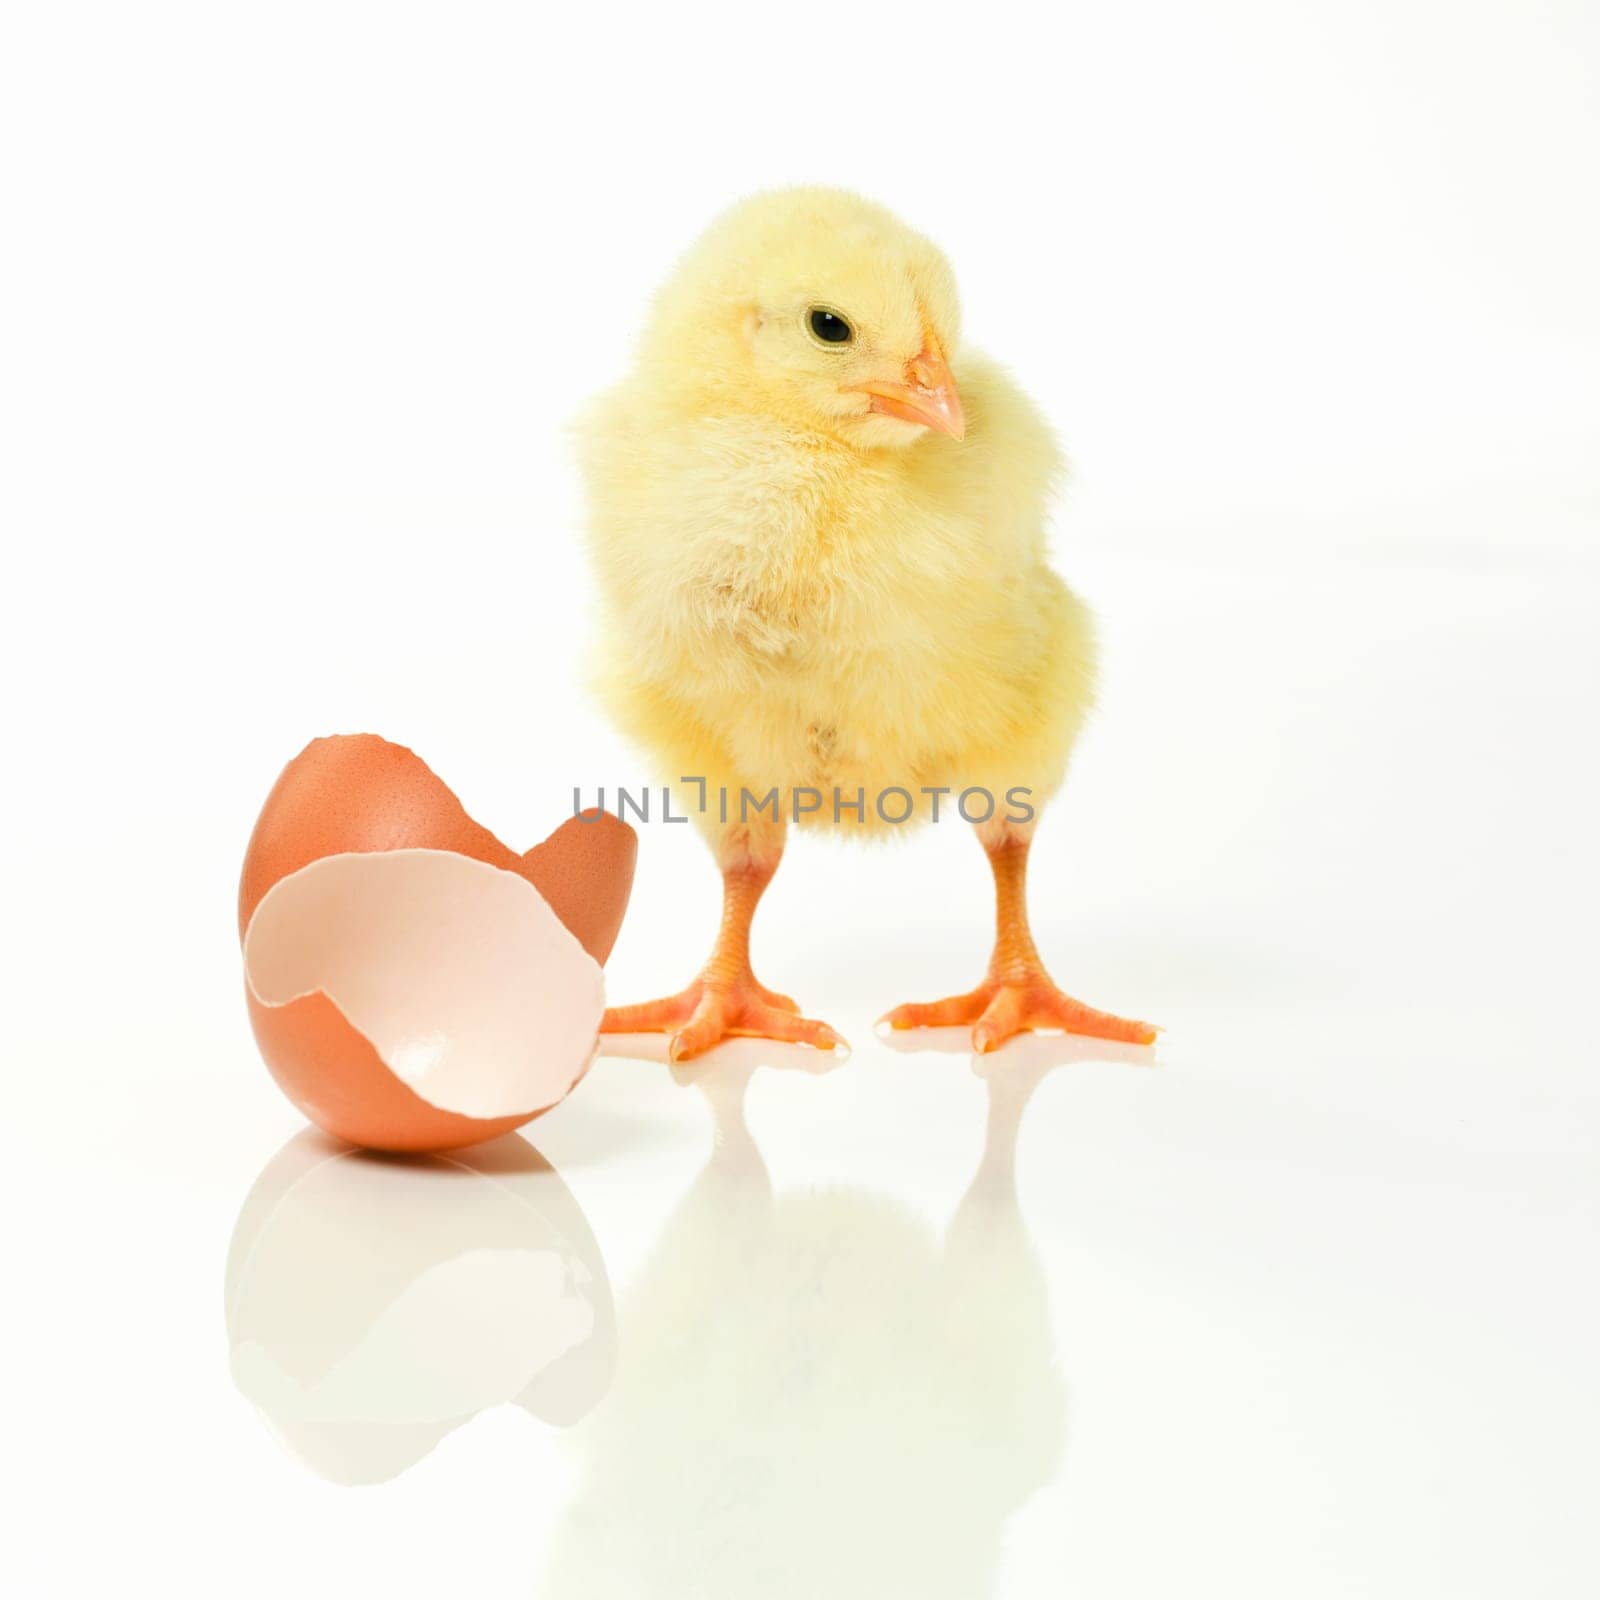 Newborn, chicken and egg in studio with isolated on white background, cute and small animal in yellow. Baby, chick and nurture for farming in agriculture, nature and livestock for sustainability.